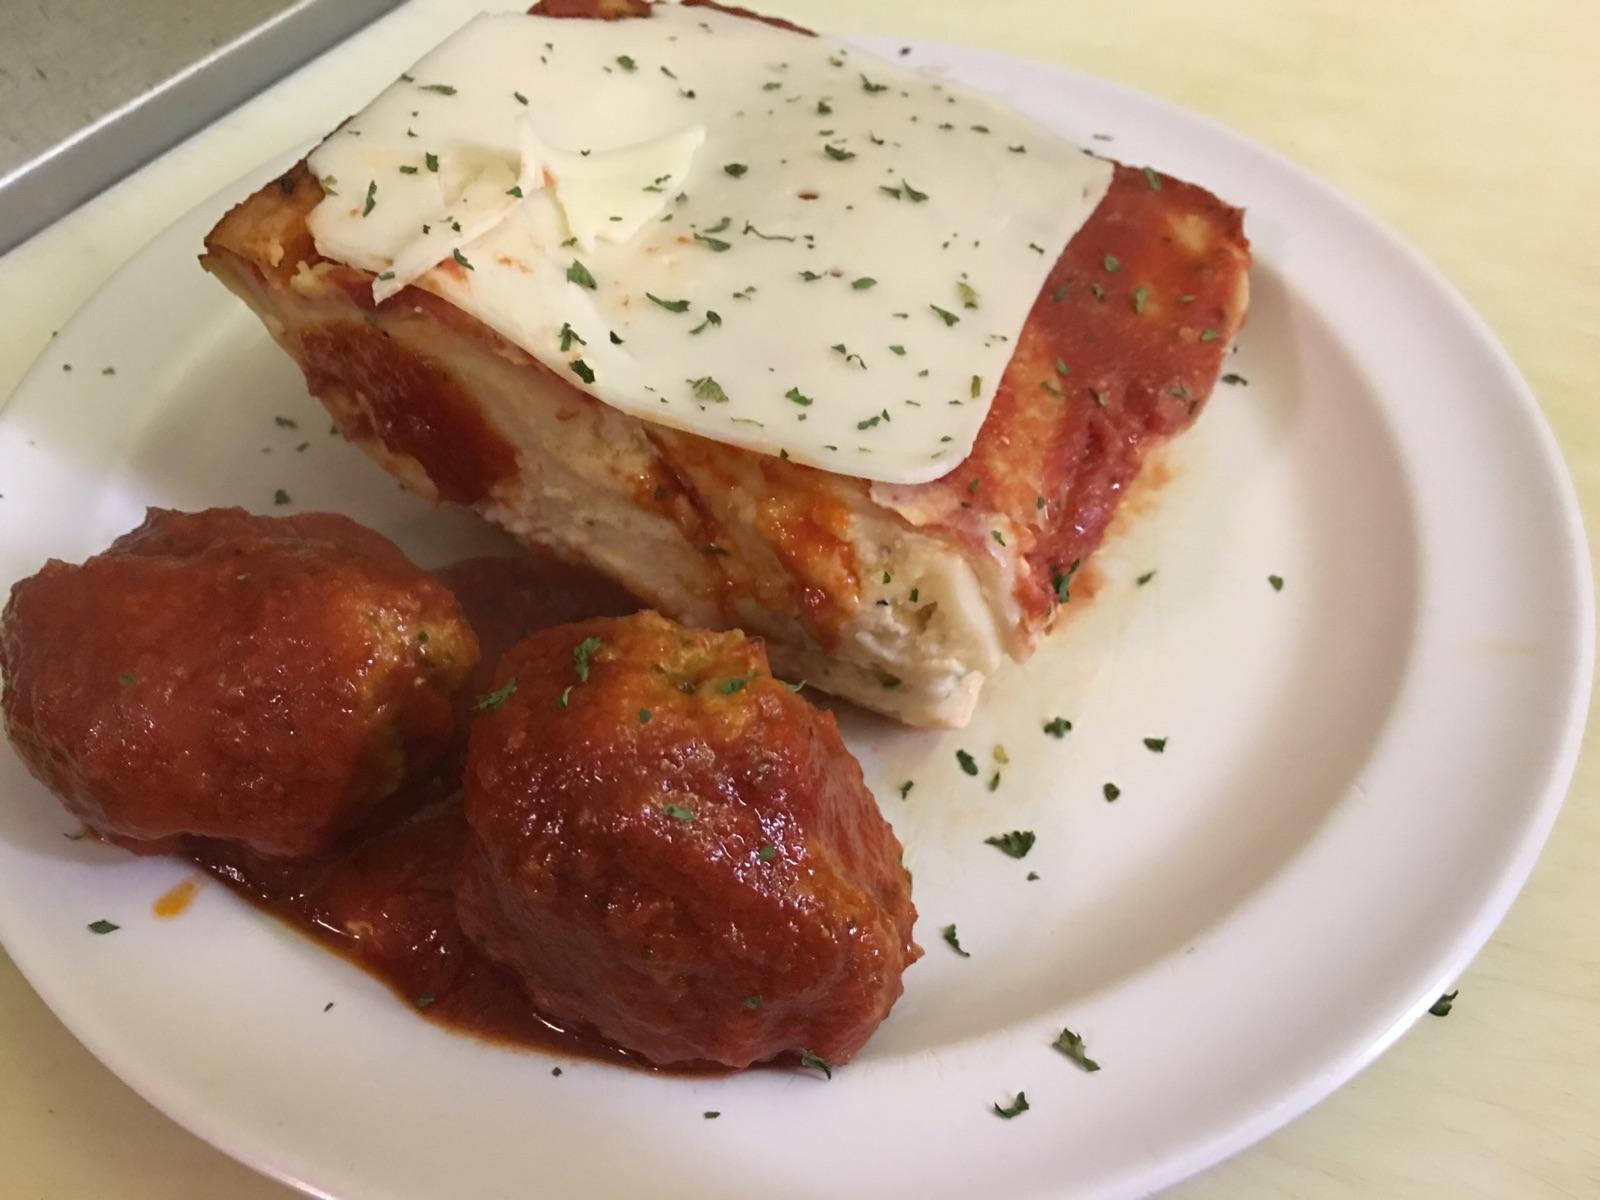 Luigis Pizza of Naples Scratch Made Cheese Lasagna with Meatballs on the side